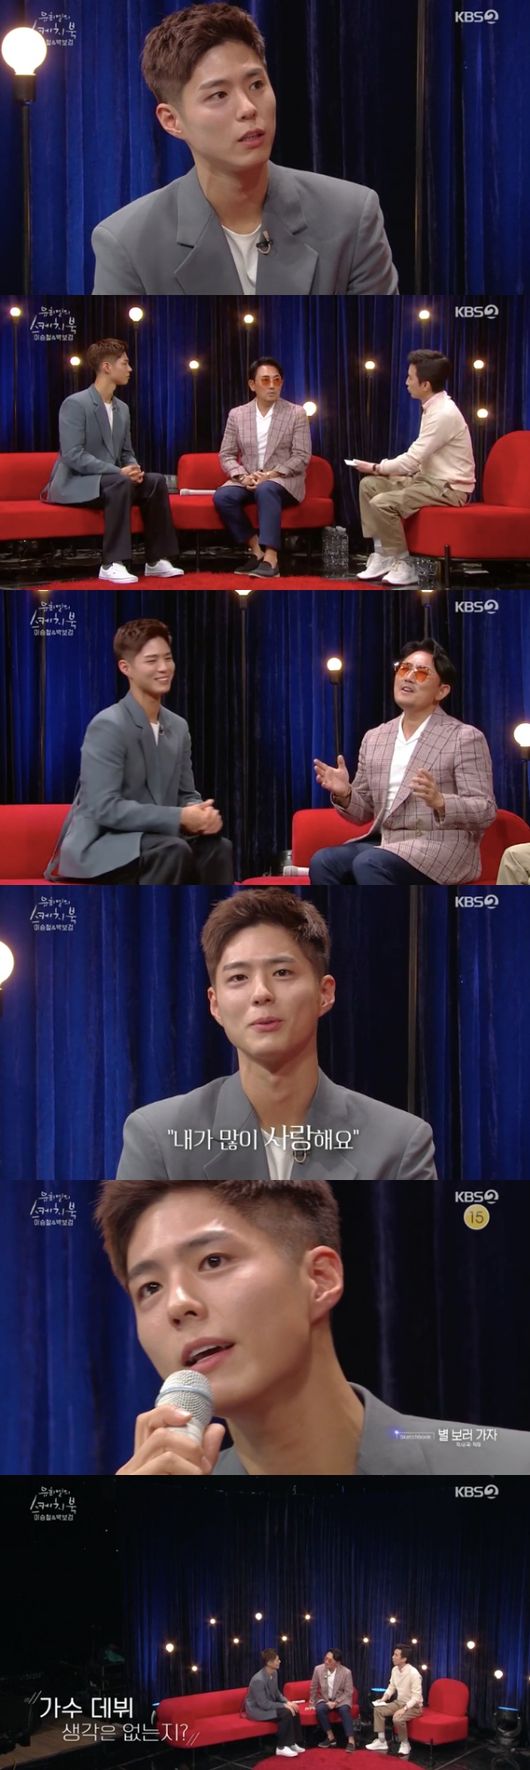 So far, no SEK guest has ever been.Actor Park Bo-gum appeared in You Hee-yeols Sketchbook and made everyone from You Hee-yeol to Lee Seung-cheol a fan.Lee Seung-cheol appeared as the first guest on KBS 2TV music program You Hee-yeols Sketchbook which was broadcast on the night of the 20th, while Park Bo-gum appeared as a SEK guest and caught the attention.Lee Seung-cheol announced the new song I Love You a lot for the 35th anniversary of debut this year.Among them, Park Bo-gum was very popular with I love you a lot in Music Video.Park Bo-gum announced Lee Seung-cheols I Love You a lot Love Live!He was impressed by playing the piano on stage with Love Live!You Hee-yeol said, I thought it was a hand sync, but it was so cool to laugh a little when it was slightly wrong at the end.Park Bo-gum said, Thanks to Lee Seung-cheol, I first appeared on Sketchbook.Park Bo-gums Sketchbook appearance as well as Love Live! with Lee Seung-cheol was also the first.Lee Seung-cheol said, I was actually worried, I did not have any damage to me, but I was so greedy and I wanted to do well, but I was so good at matching it with the band.I was in the band. Since when did you play the piano? I was so honored to me and was delighted to be appearing on Sketchbook, so I was so nervous that I fell asleep yesterday, Park Bo-gum said.You Hee-yeol praised Park Bo-gums beauty, saying, But the skin is so good.Lee Seung-cheol also expressed federal affection towards Park Bo-gum.Park Bo-gum said politely about his relationship with Lee Seung-cheol, It is a great artist, and since debut, it is the first time that Music Video has been released, so I have been given the opportunity.Lee Seung-cheol said, I was given the opportunity to say, Is not it a word pretty?Park Bo-gum responded: I love you so much, he replayed the last scene in the Music Video, and Confessions that his first dream was Singer.Also, I called the Lets go to the stars of the load that collected the topic from the advertisement.You Hee-yeol admired the song, saying it was beautiful, and Lee Seung-cheol said, The voice is beautiful.I pick a person who calls a song cleaner than a person who has a lot of skills or techniques, and does not come out with an angle. Nevertheless, Park Bo-gum said to the end, It is not enough to debut.He added, There is no plan yet, and I am faithful to acting, but I have a desire to meet with my fans musically.